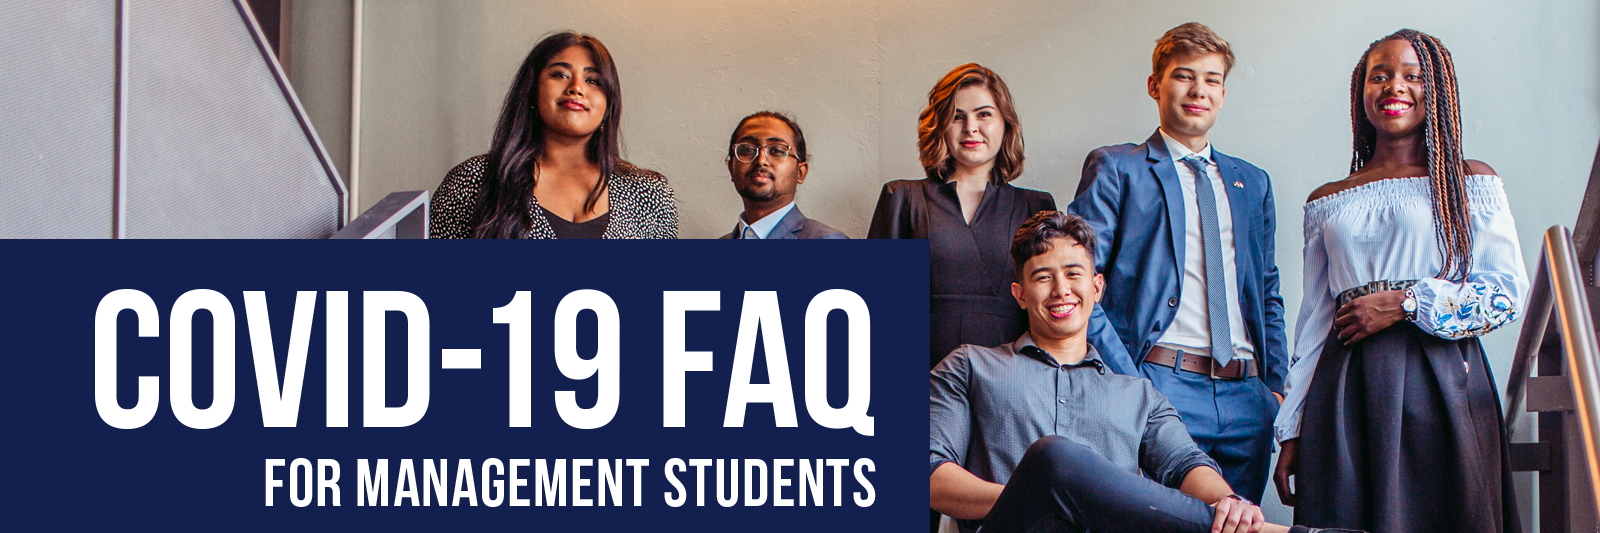 COVID-19 FAQ for Management students